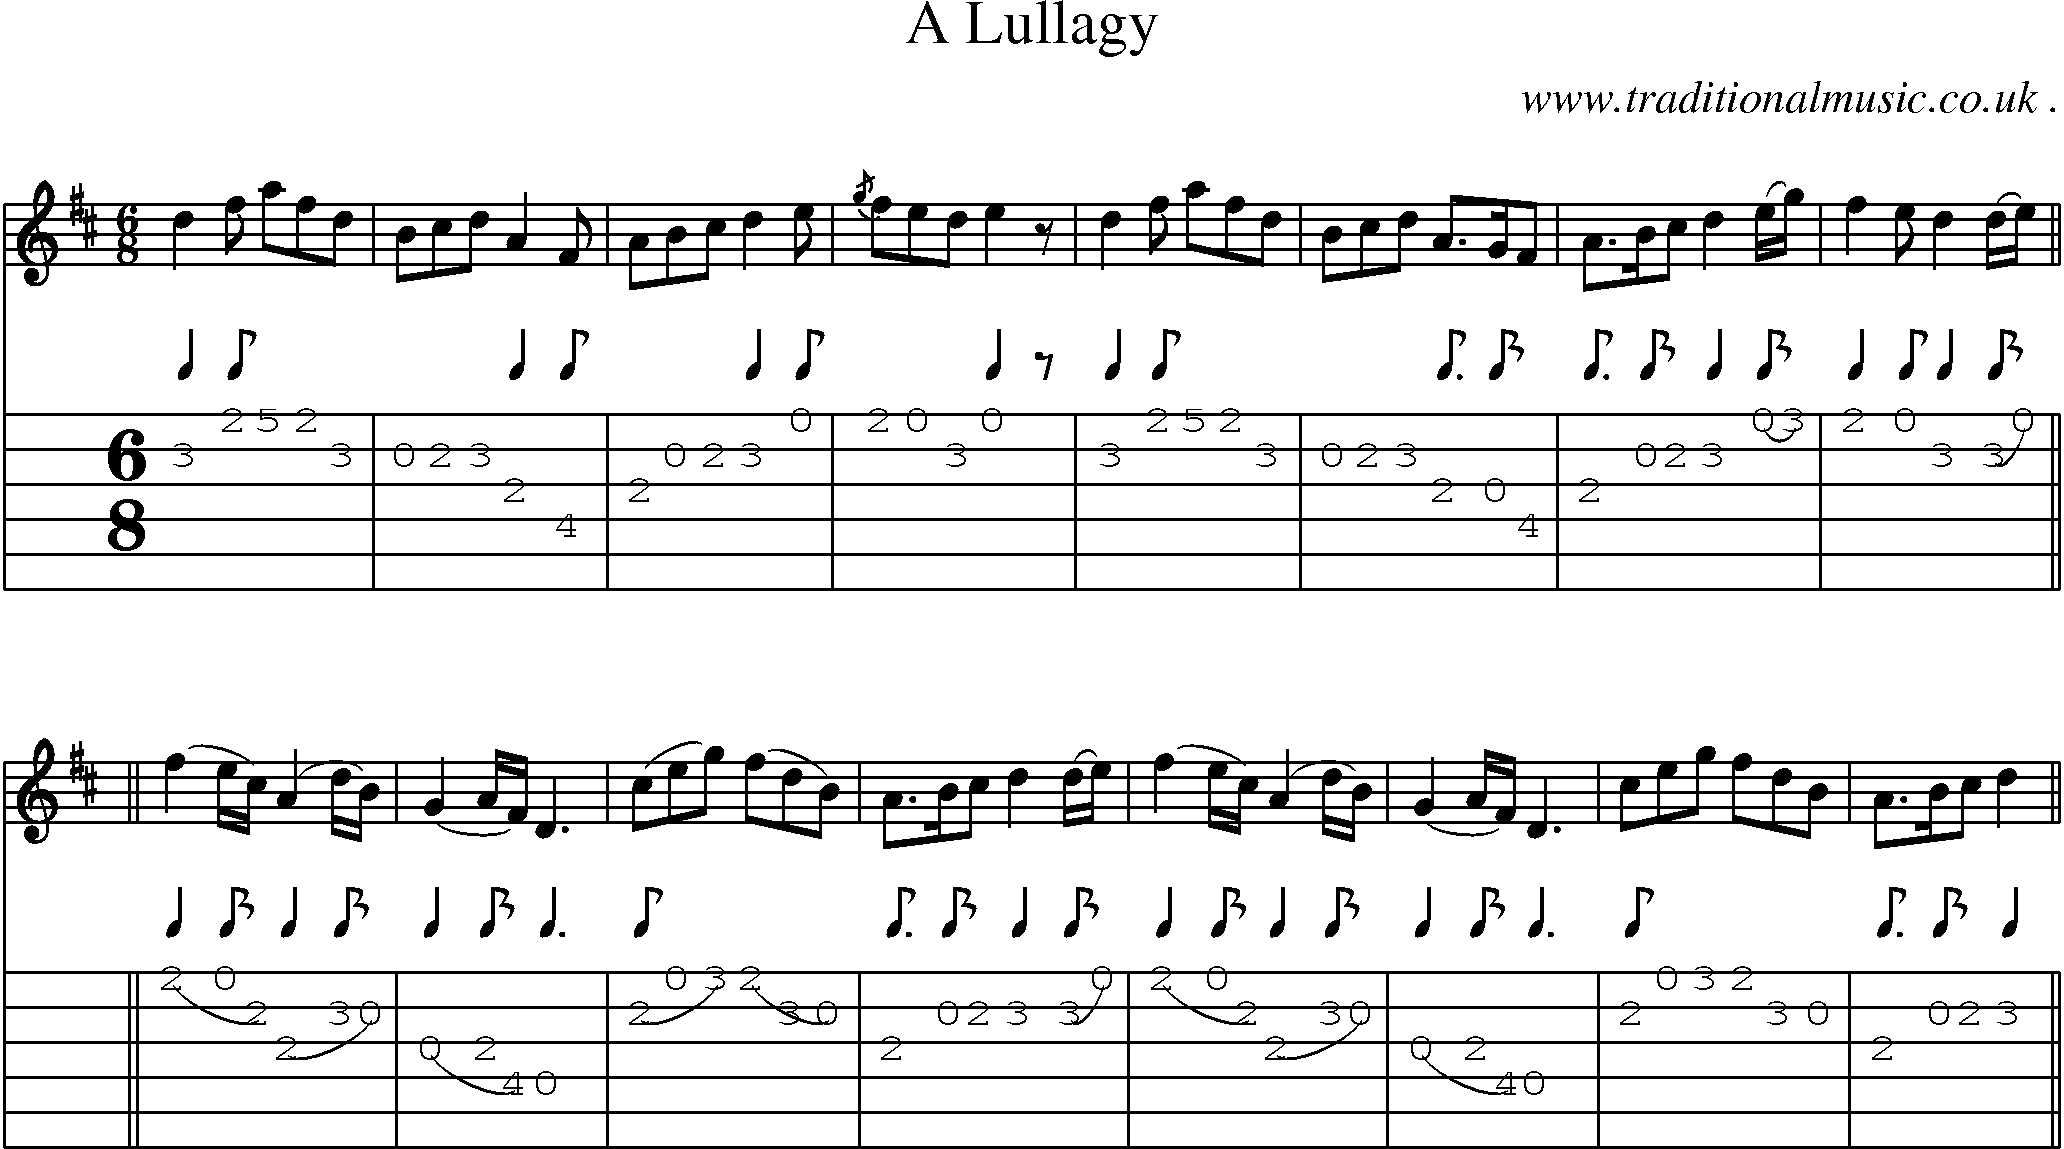 Sheet-music  score, Chords and Guitar Tabs for A Lullagy